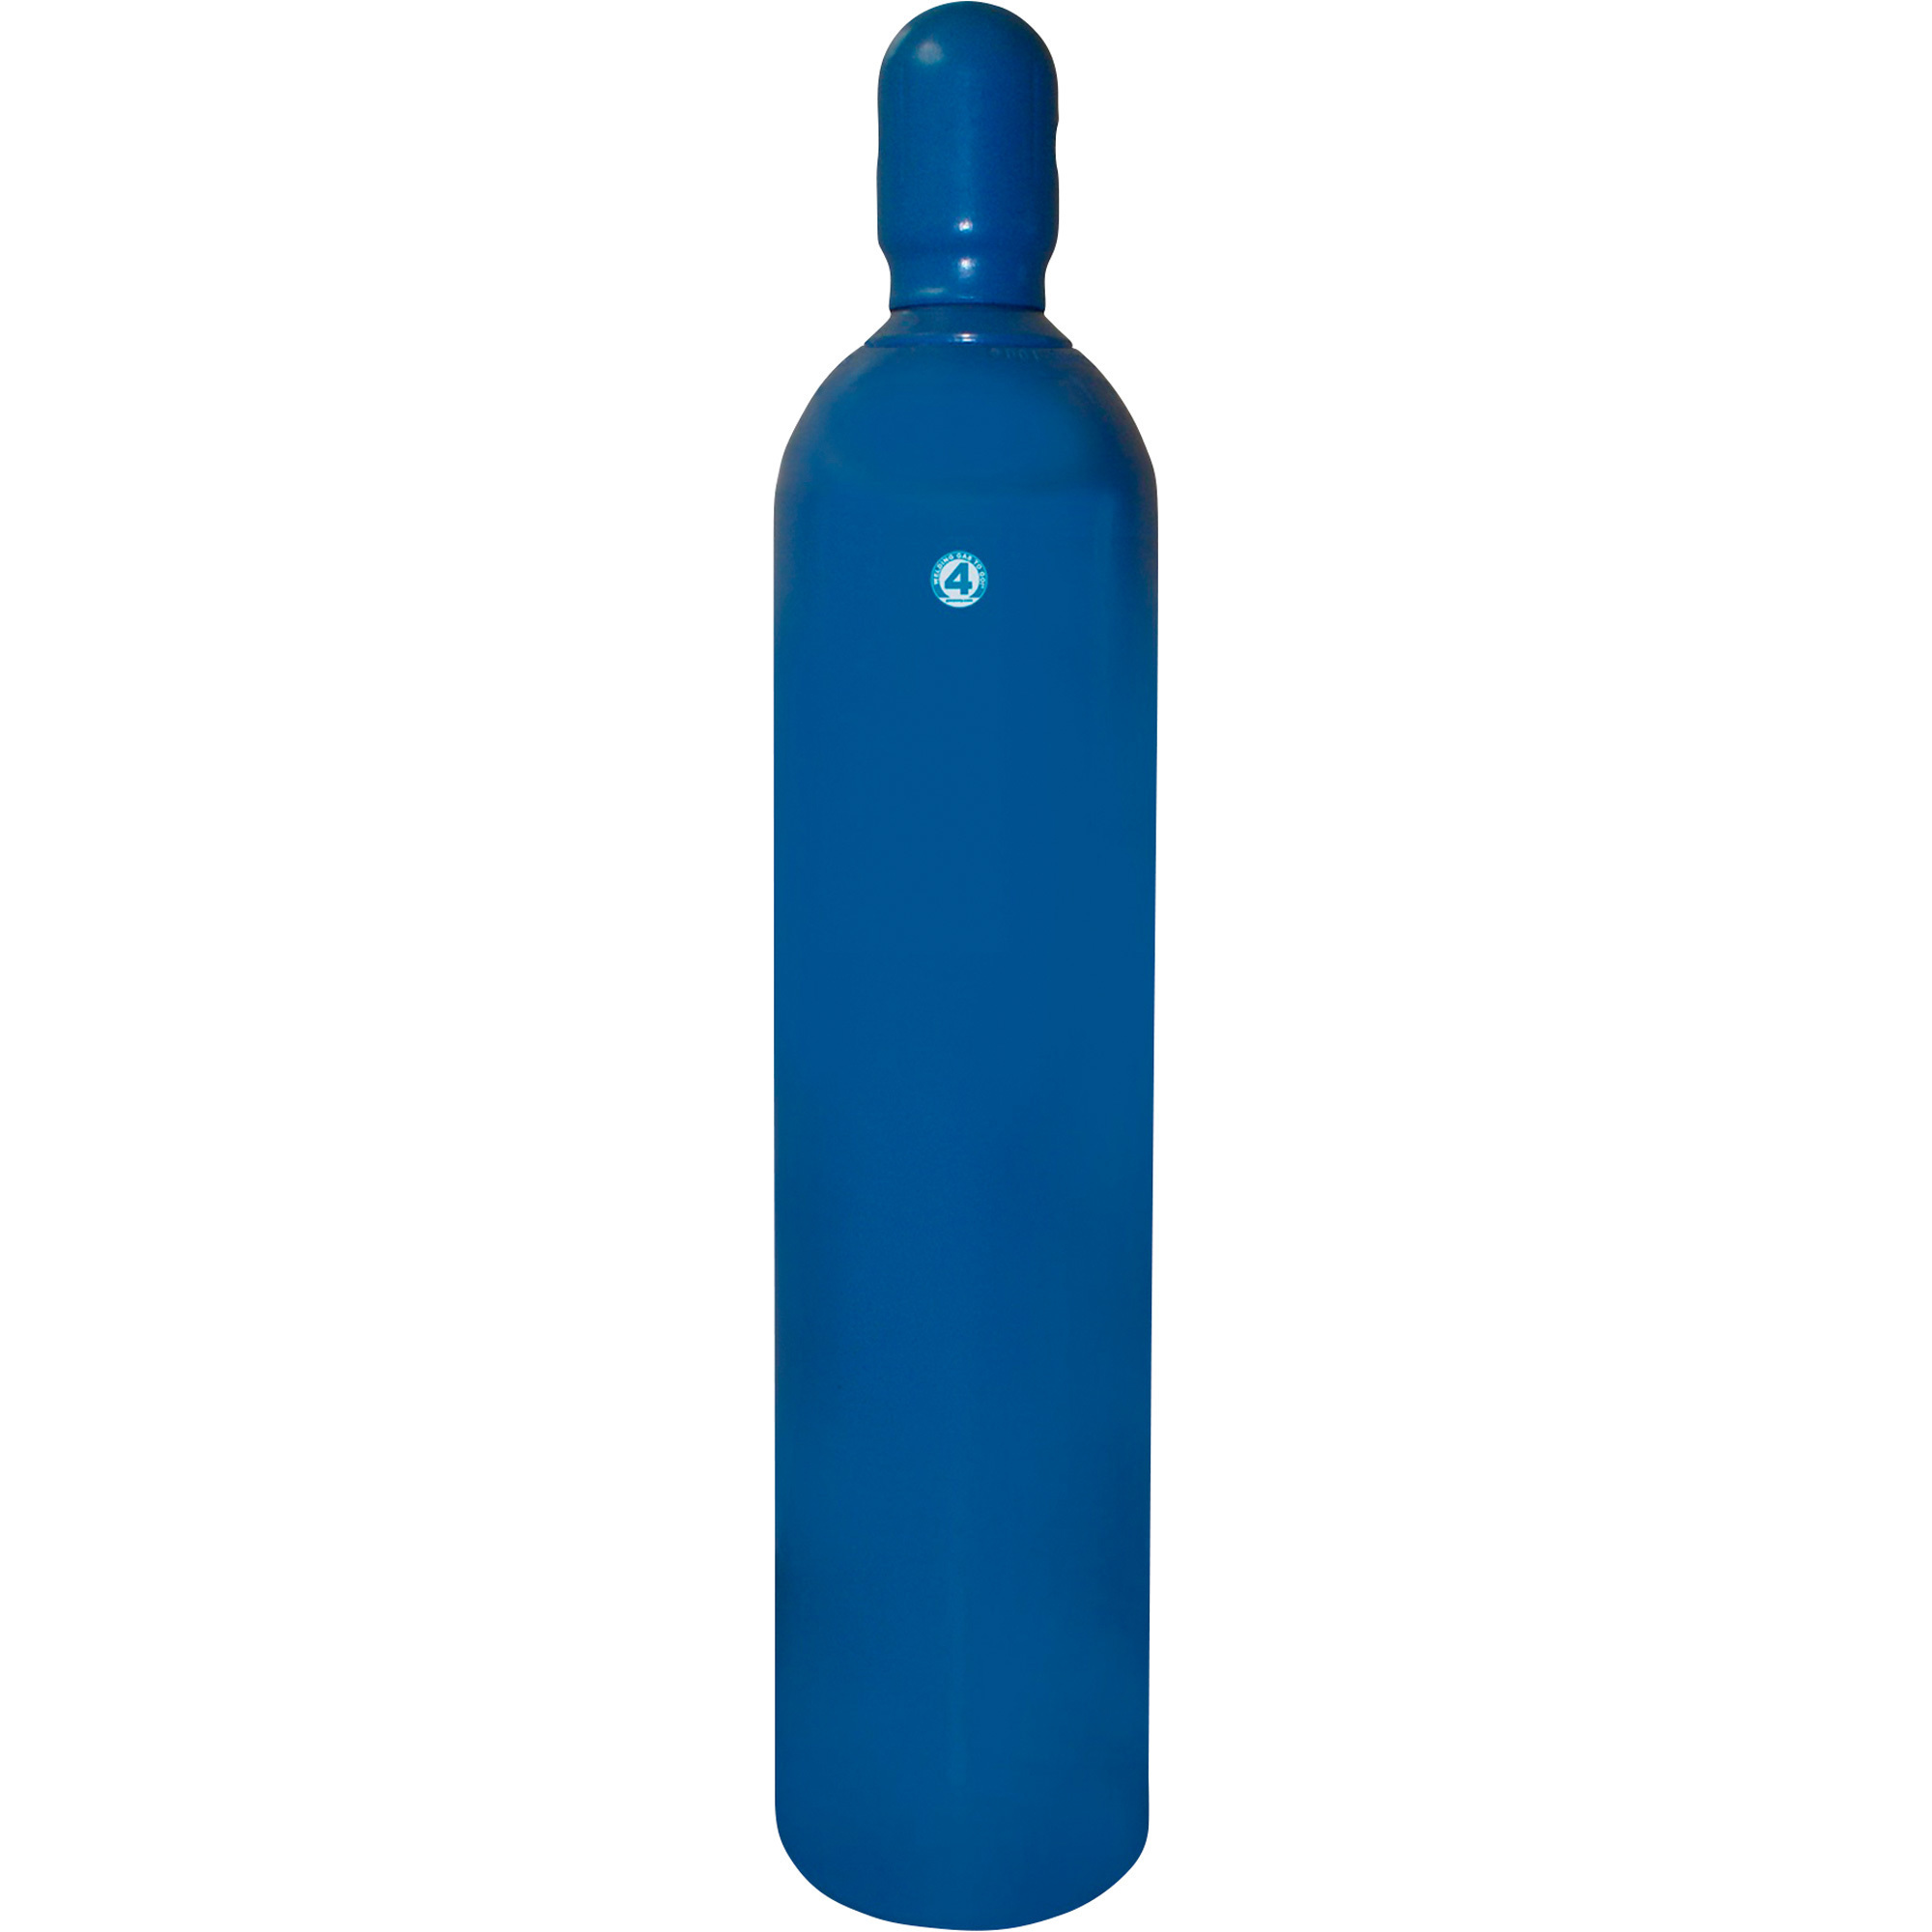 Thoroughbred 75/25 Argon/CO2 Gas Cylinder Fill or Exchange â Size #4, 125CF